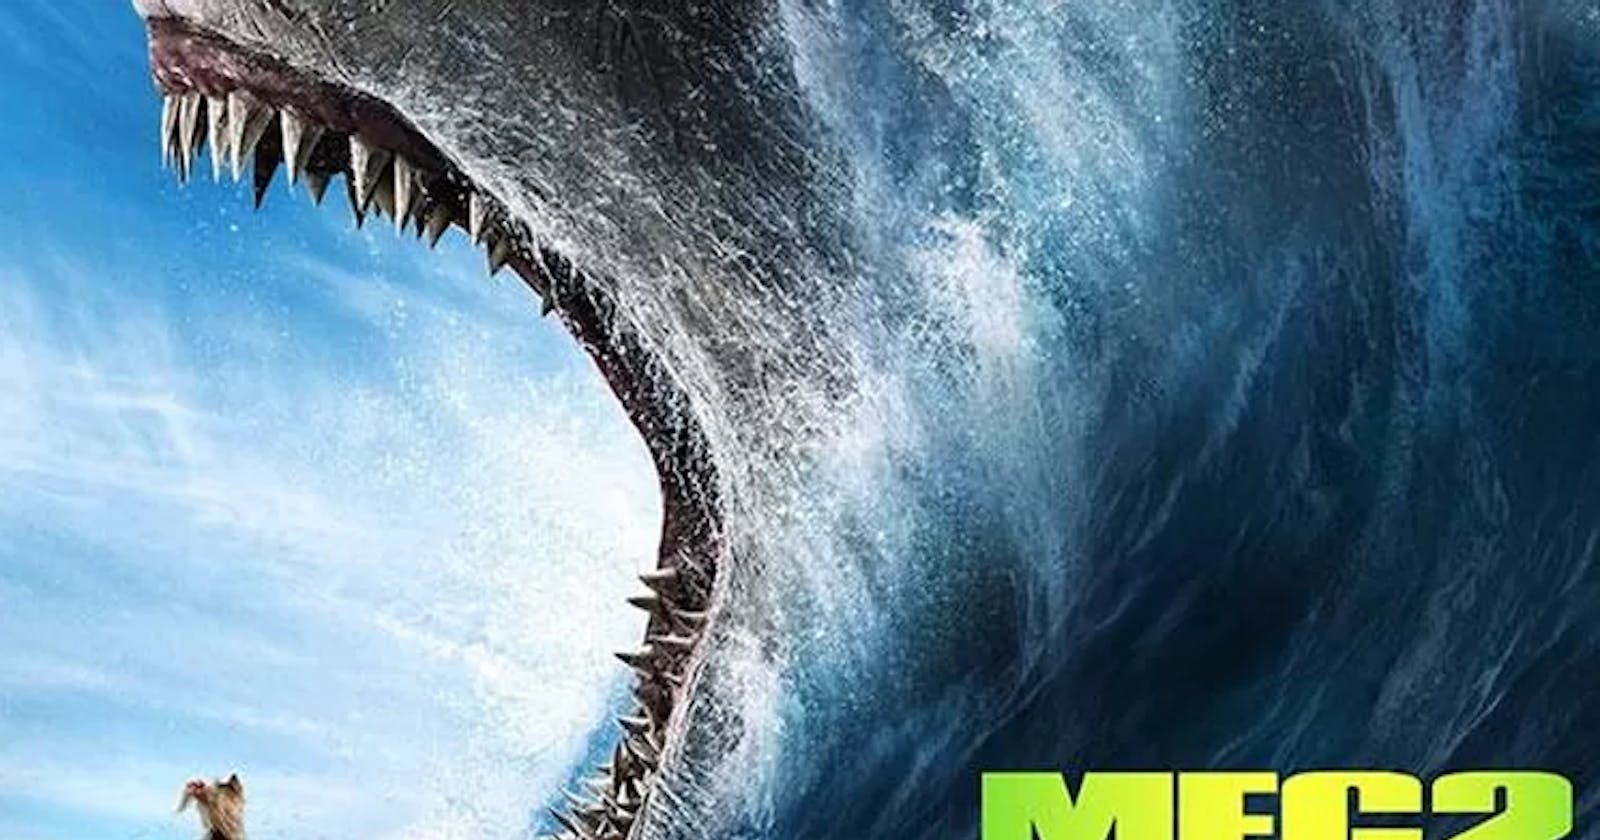 "Jaws Drop as 'Meg 2: The Trench' Unleashes Unforgettable Shark Attack Sequence"